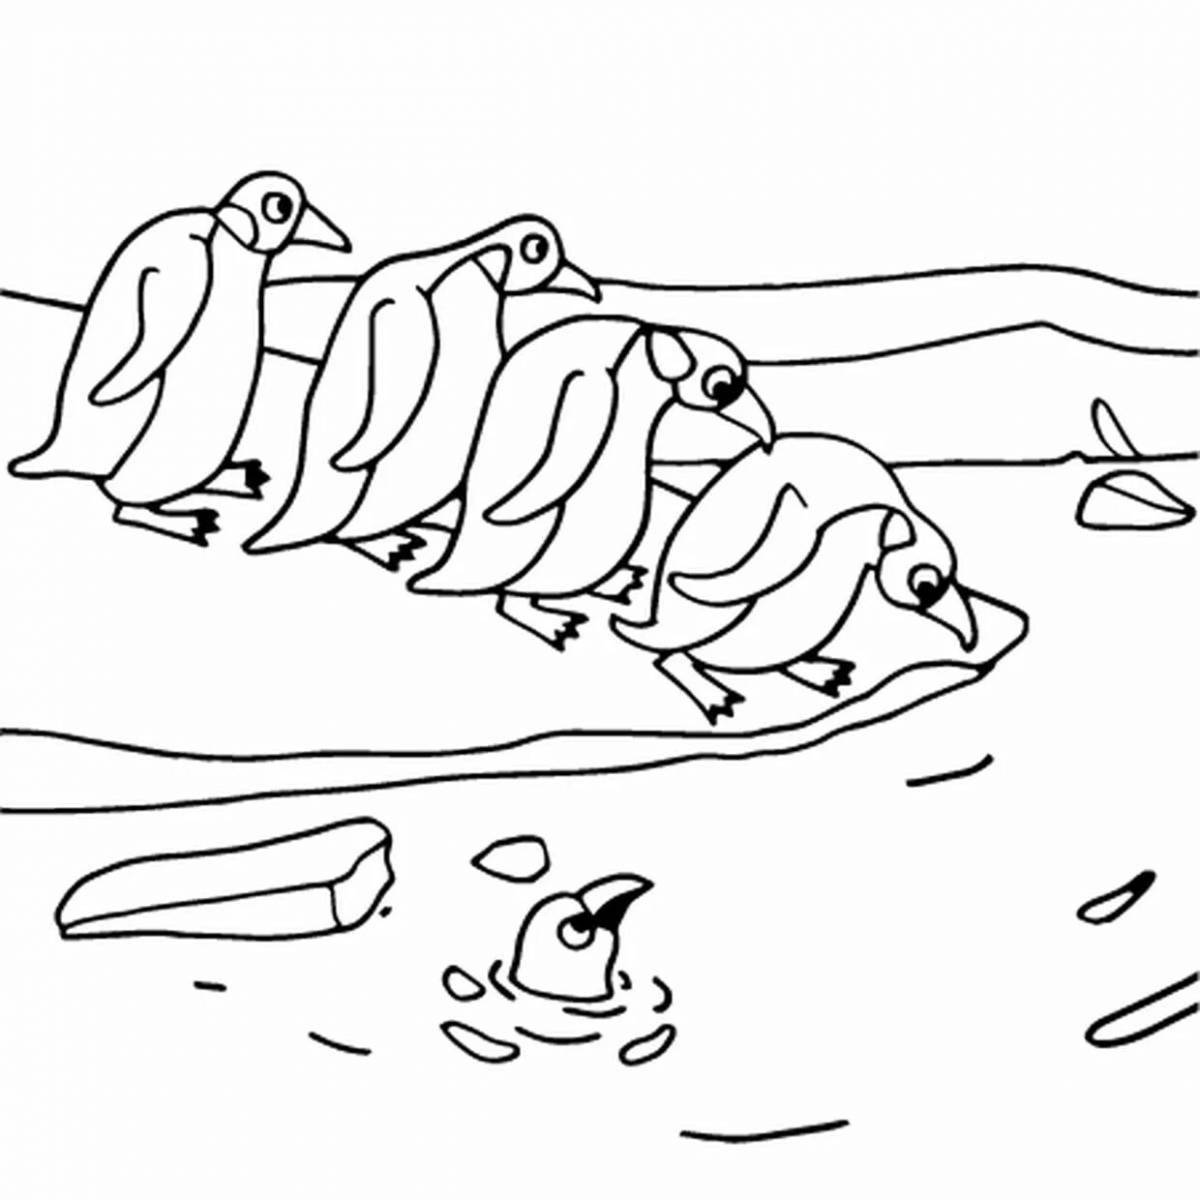 Cute penguin on the ice floe coloring pages for kids